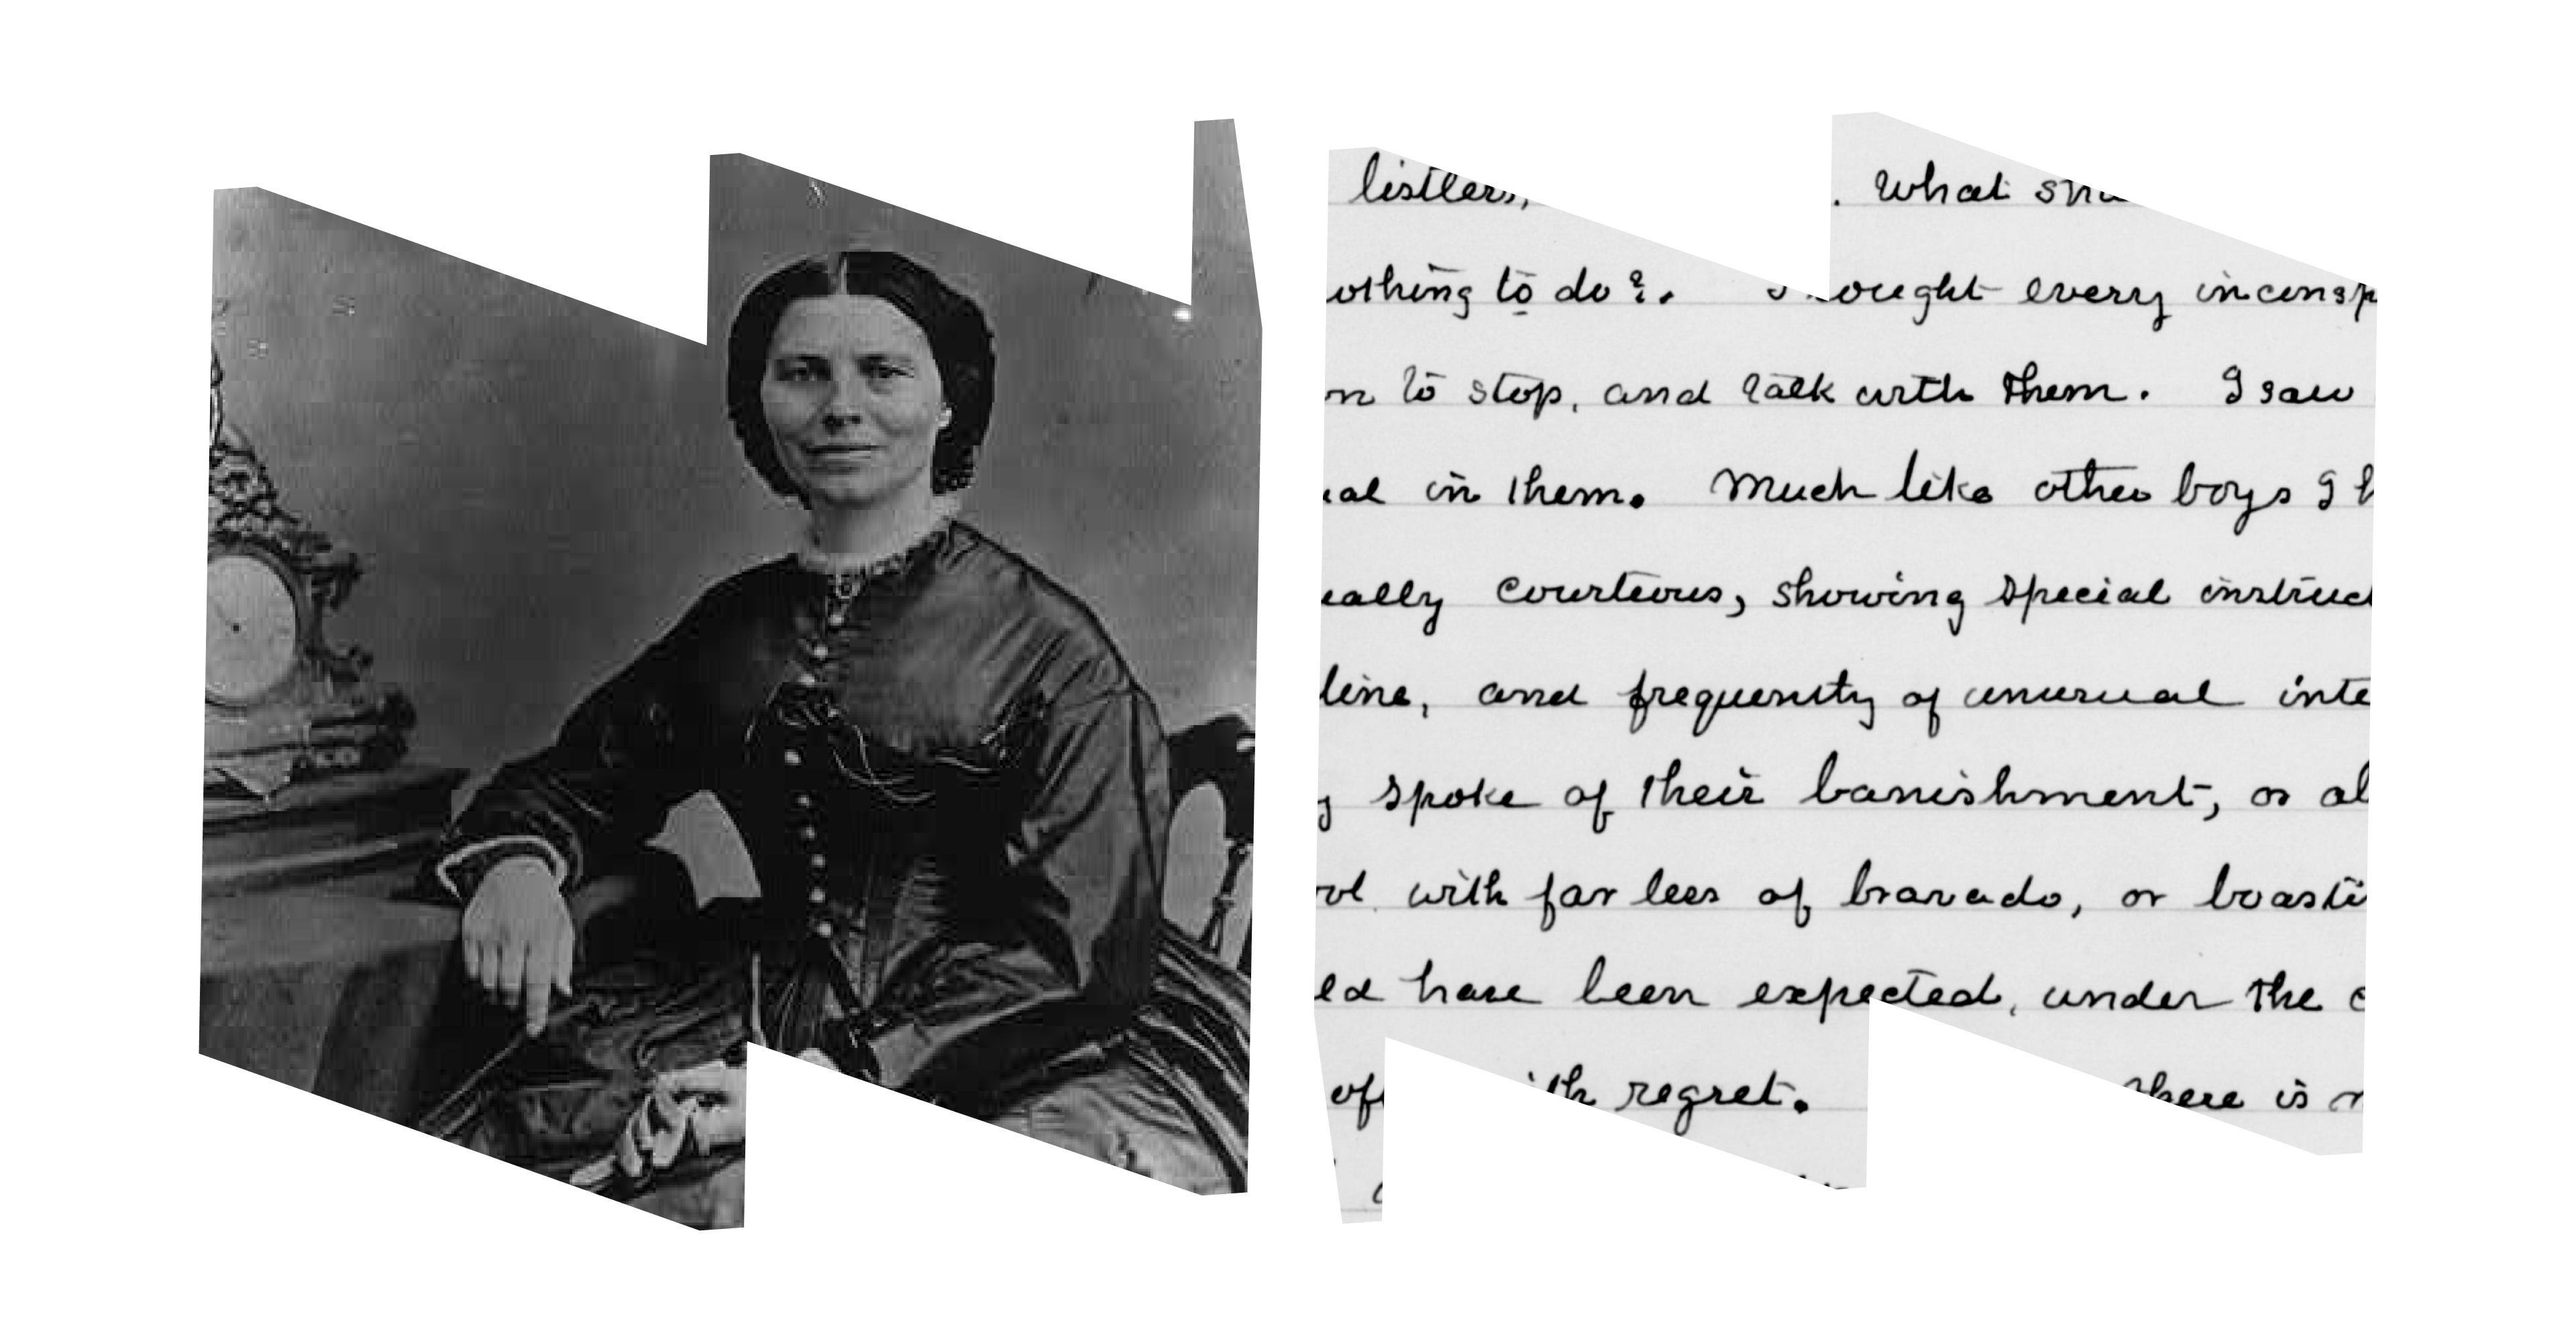 In left "W" frame, a black and white image of Clara Barton, seated. In right "M" frame, Clara's writing in cursive. 